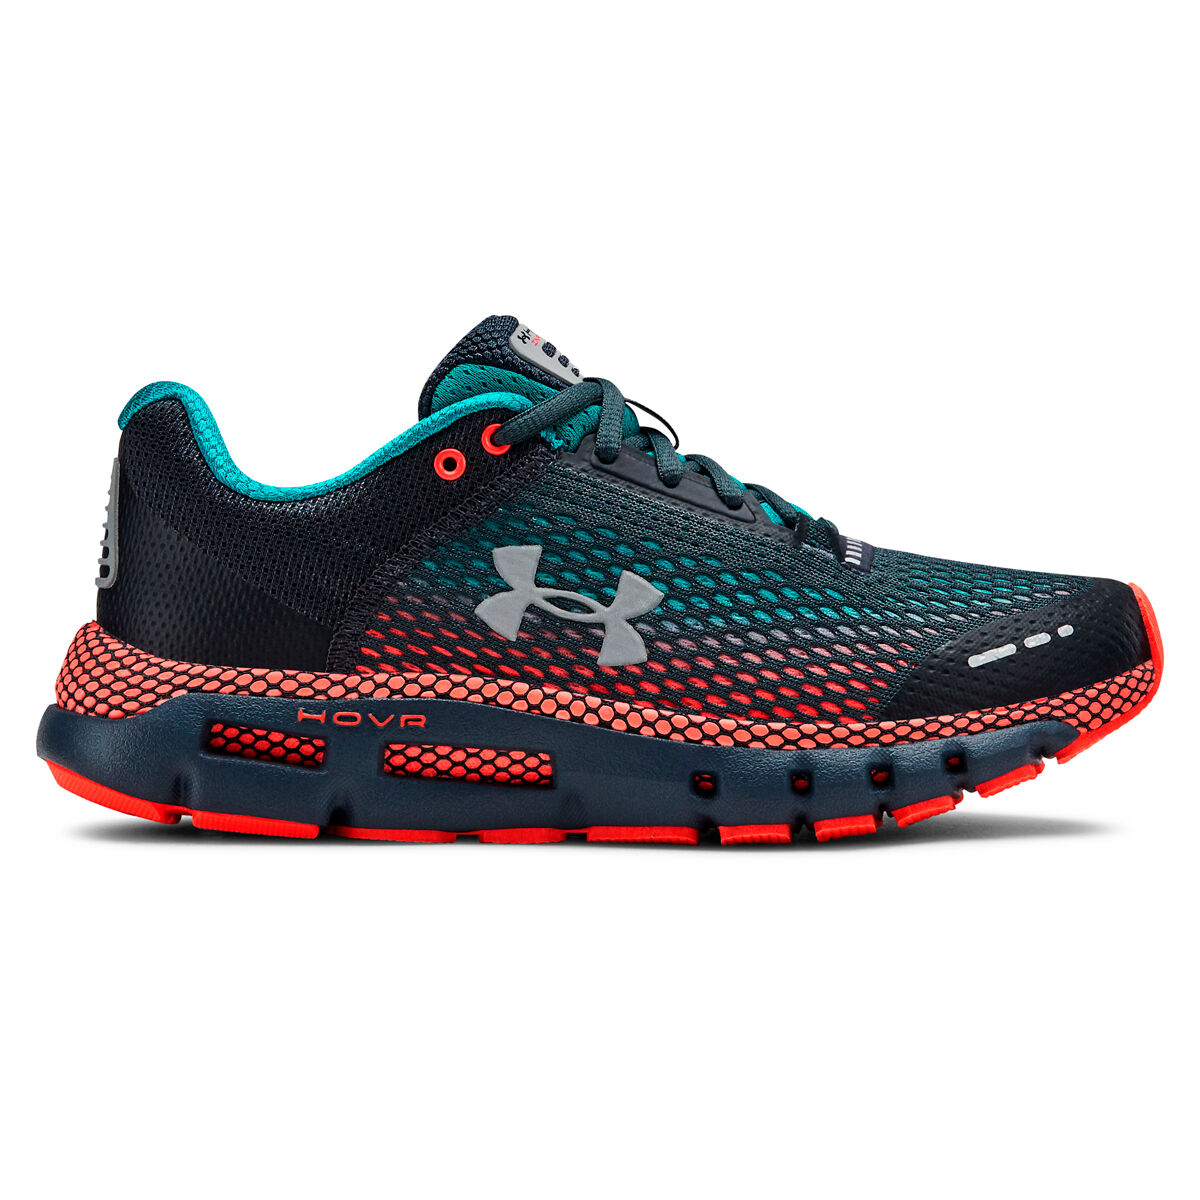 under armour teal shoes